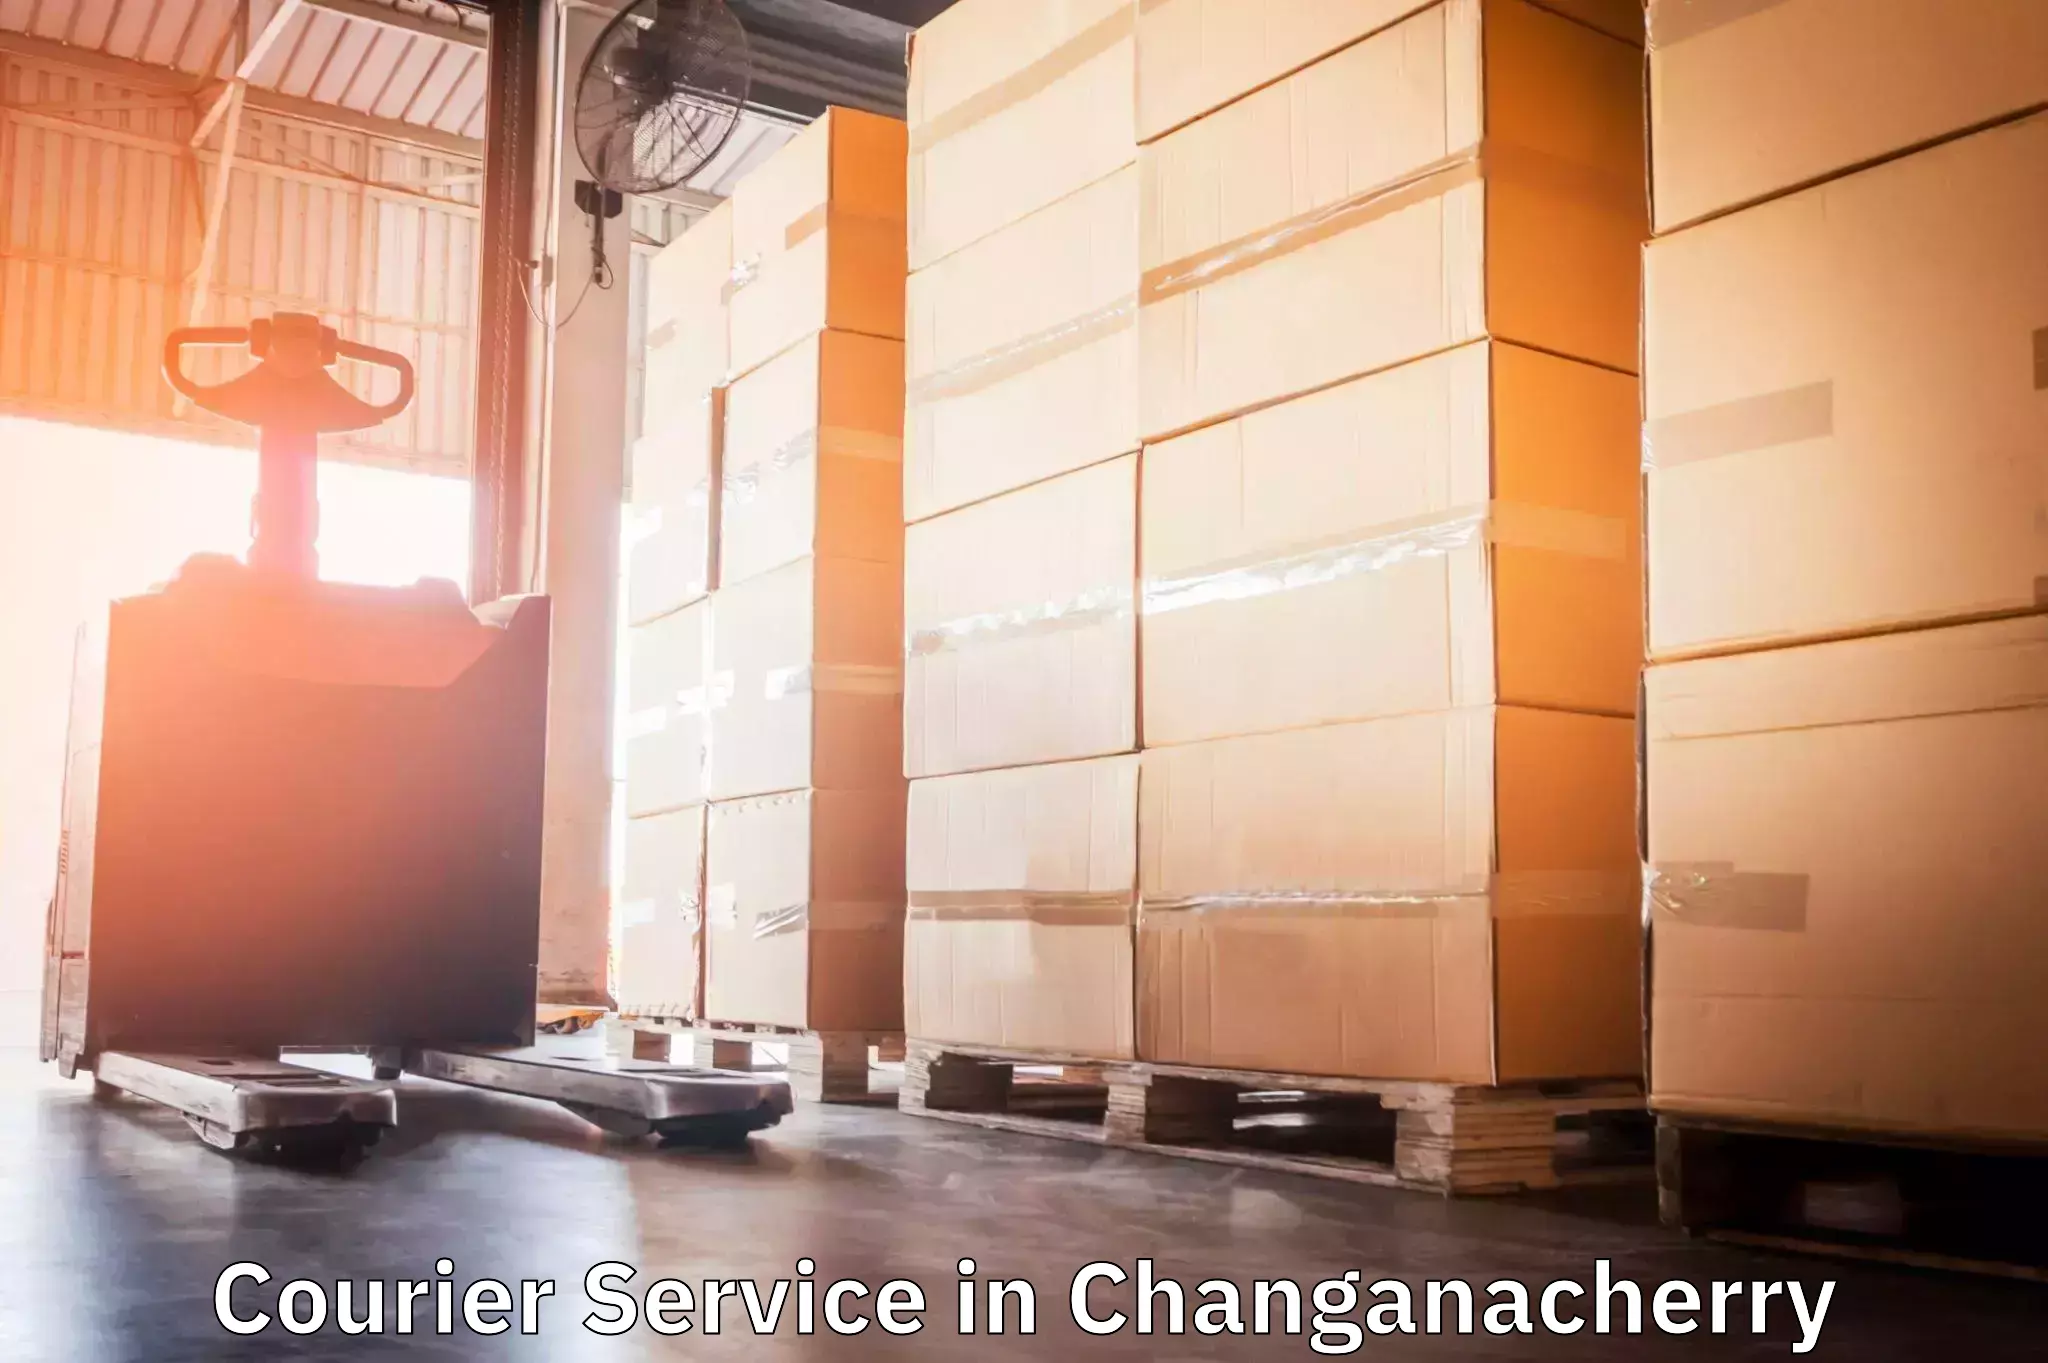 Competitive shipping rates in Changanacherry